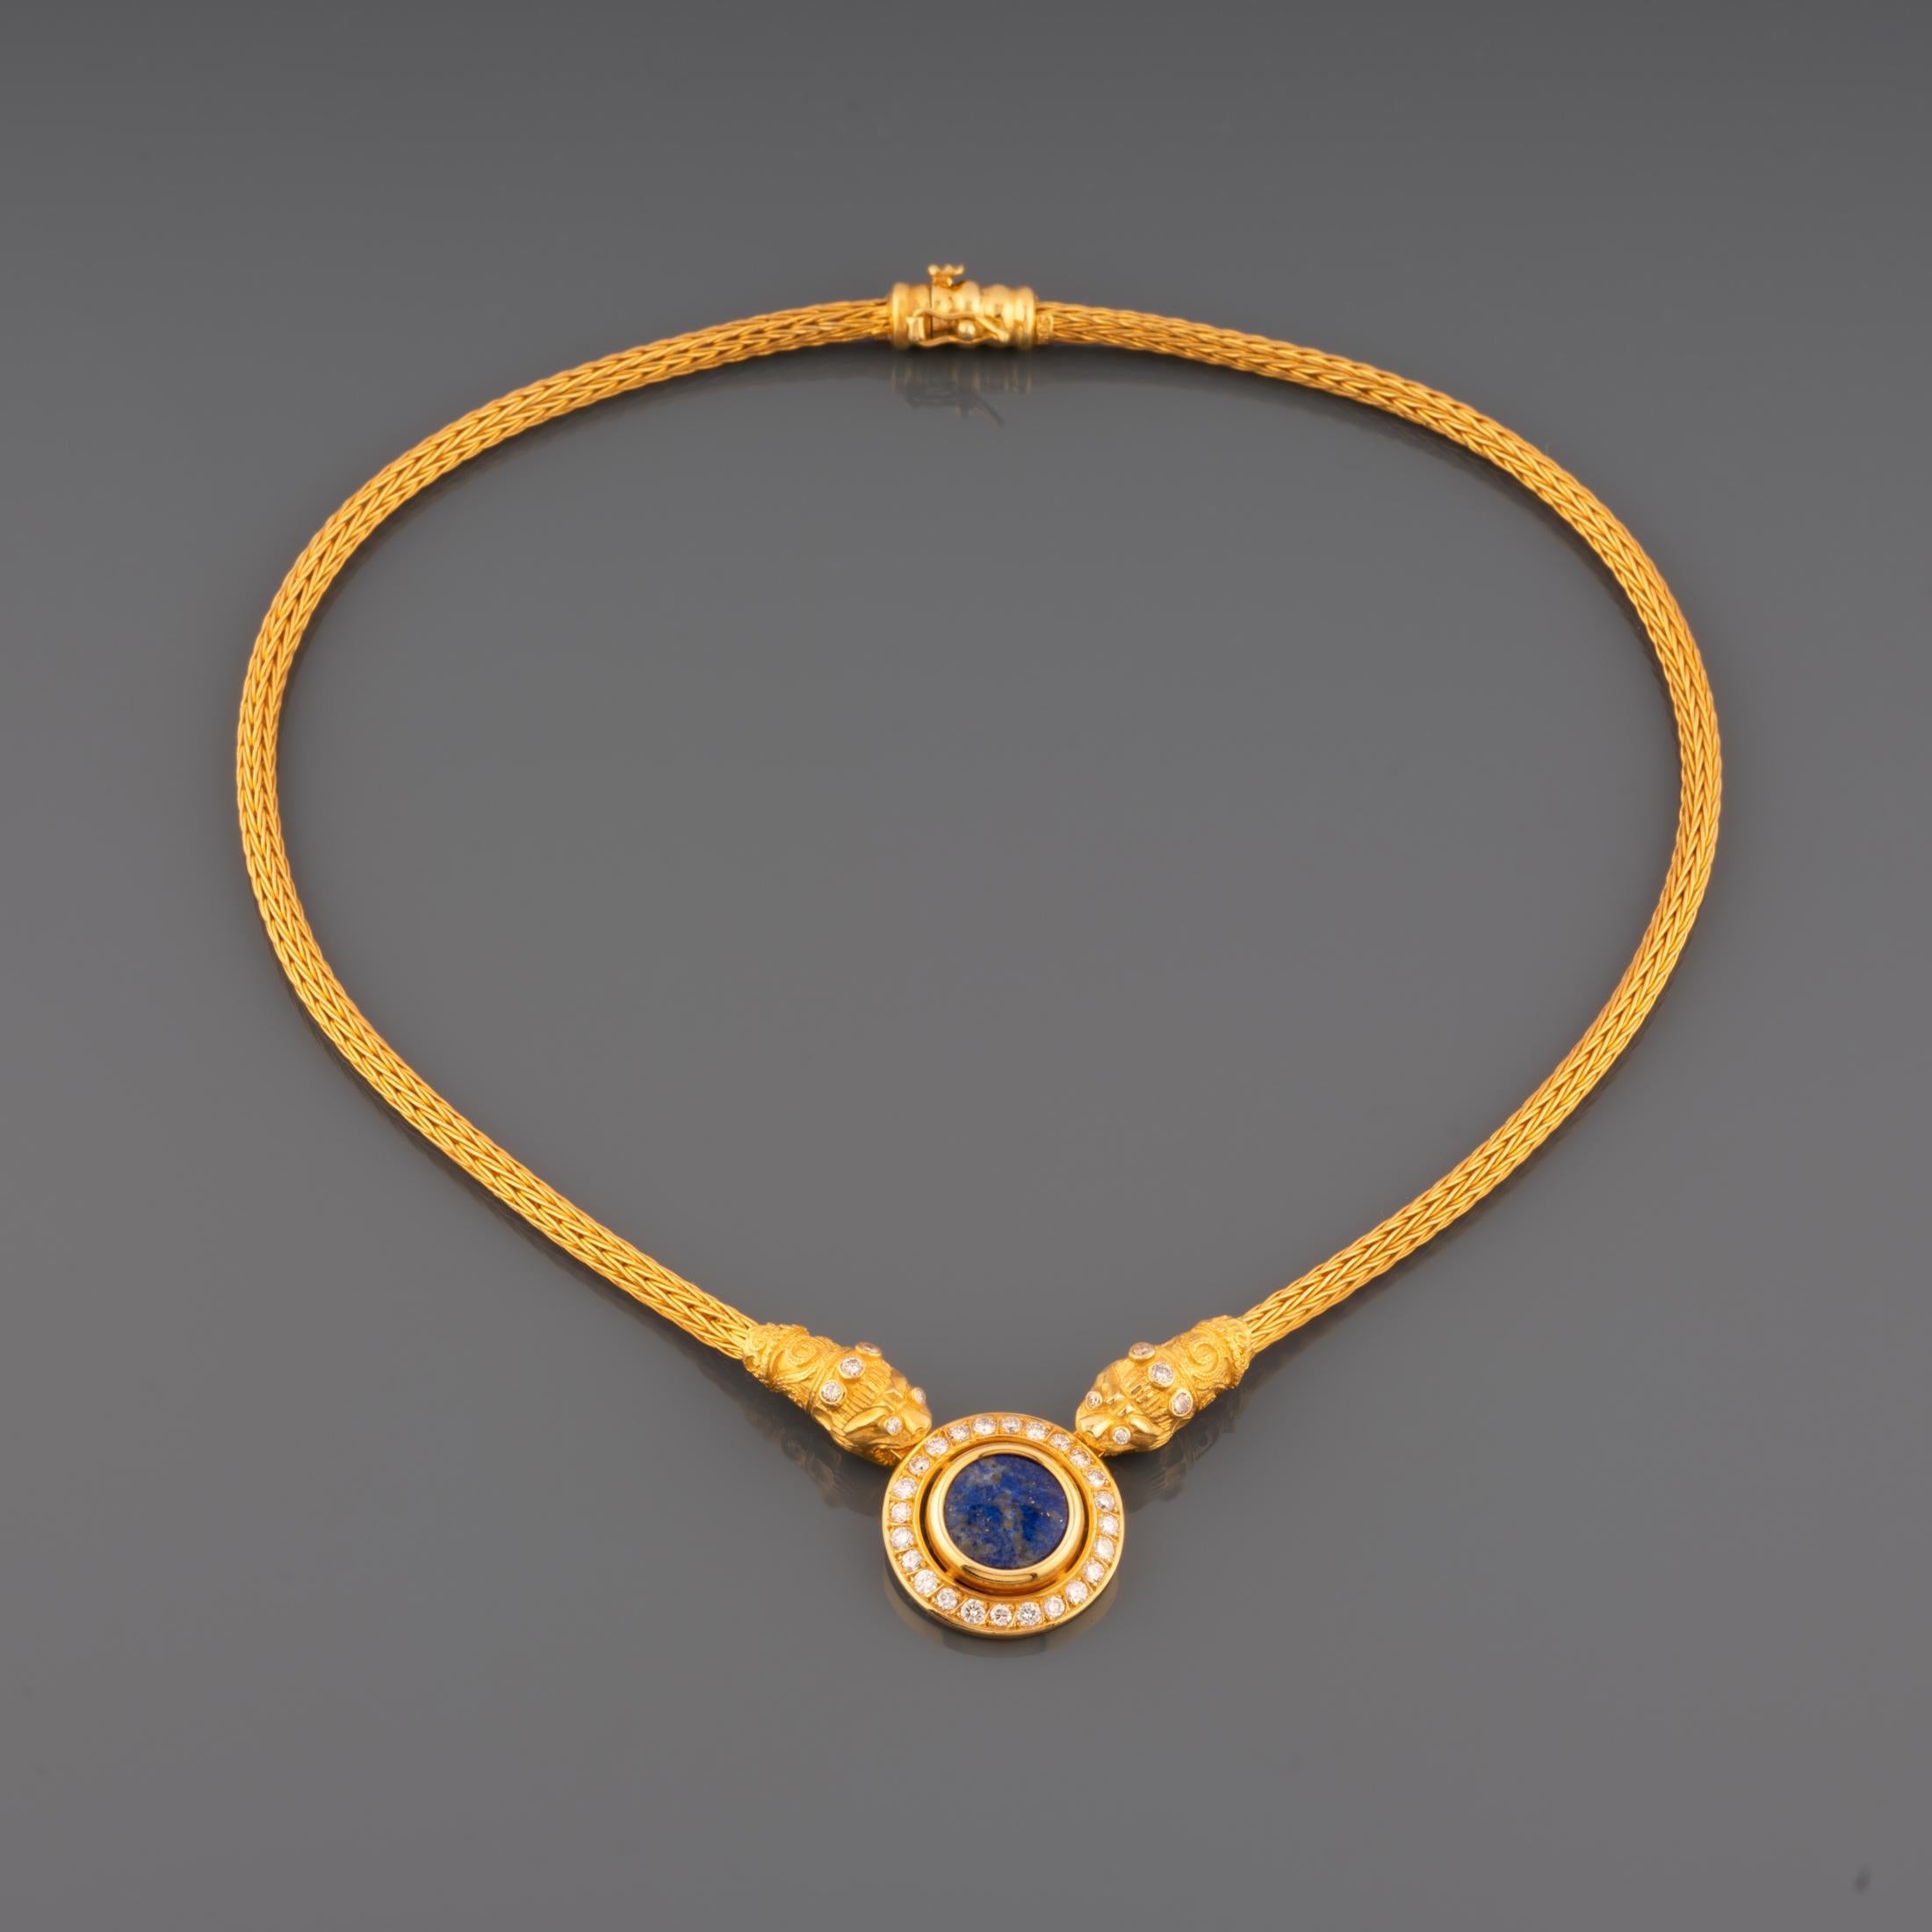 A very lovely necklace, greek made.

Made in yellow gold 18k, set with 1.50 carats of diamonds and a Cabochon of lapis Lazuli.

The length is 42cm, the diameter of central part is 22mm.

Weight: 39 grams